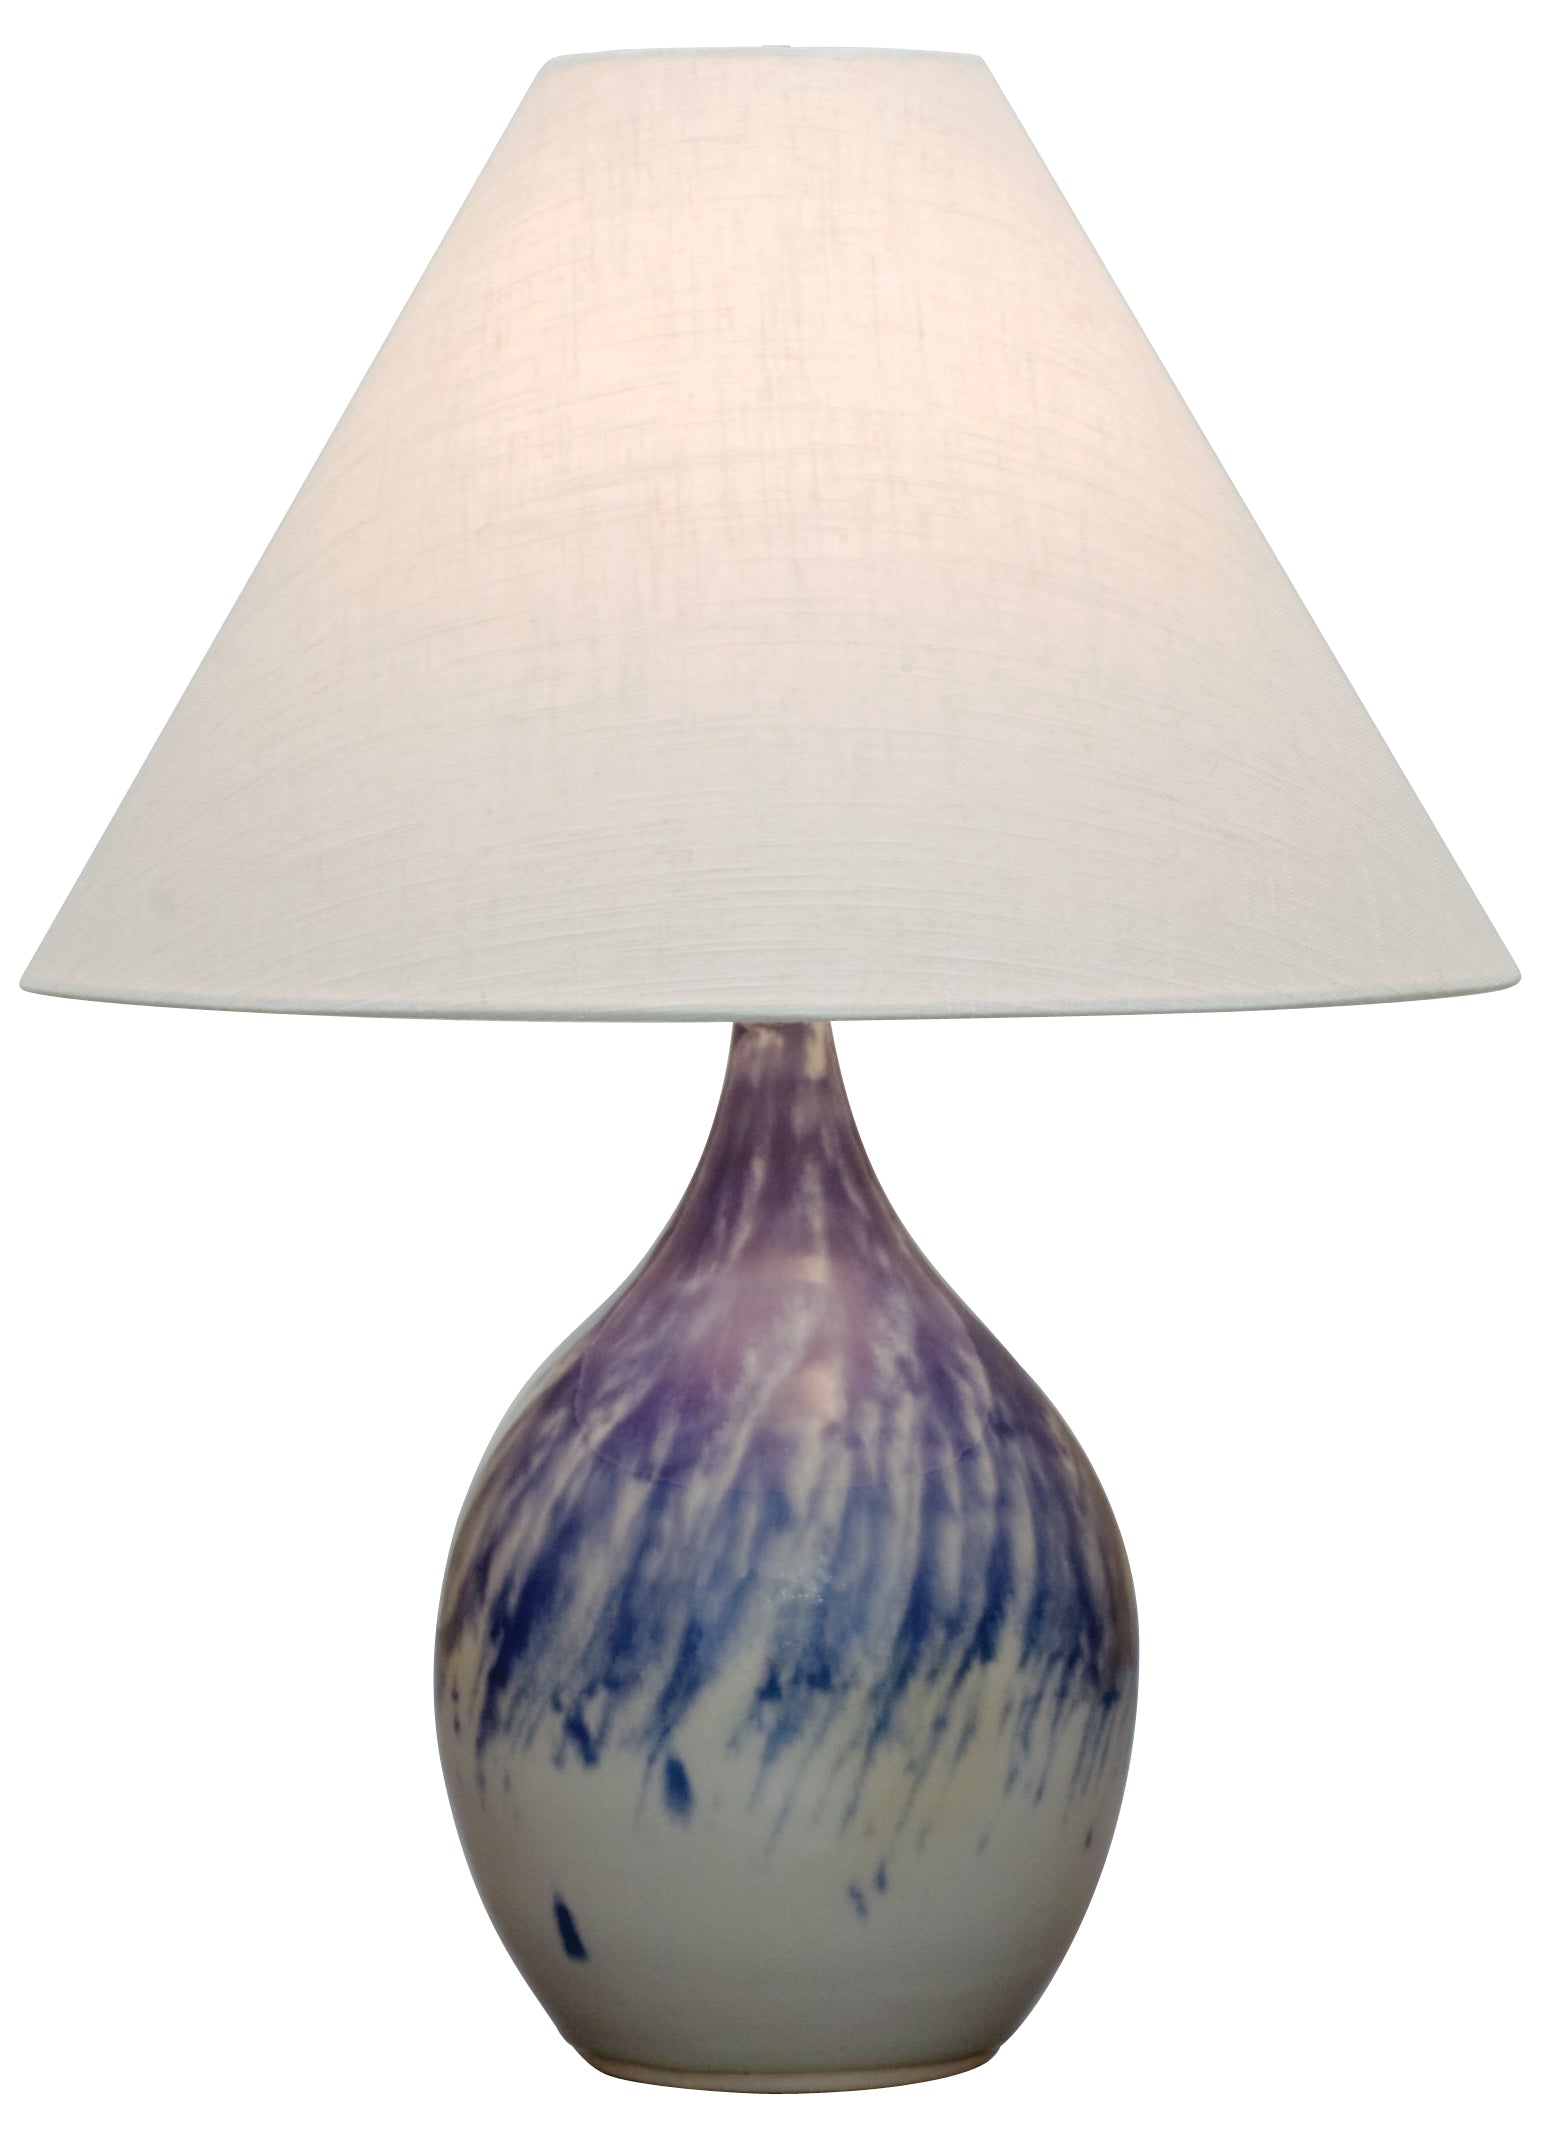 House of Troy Scatchard 22.5" Stoneware Table Lamp in Decorated Gray GS300-DG